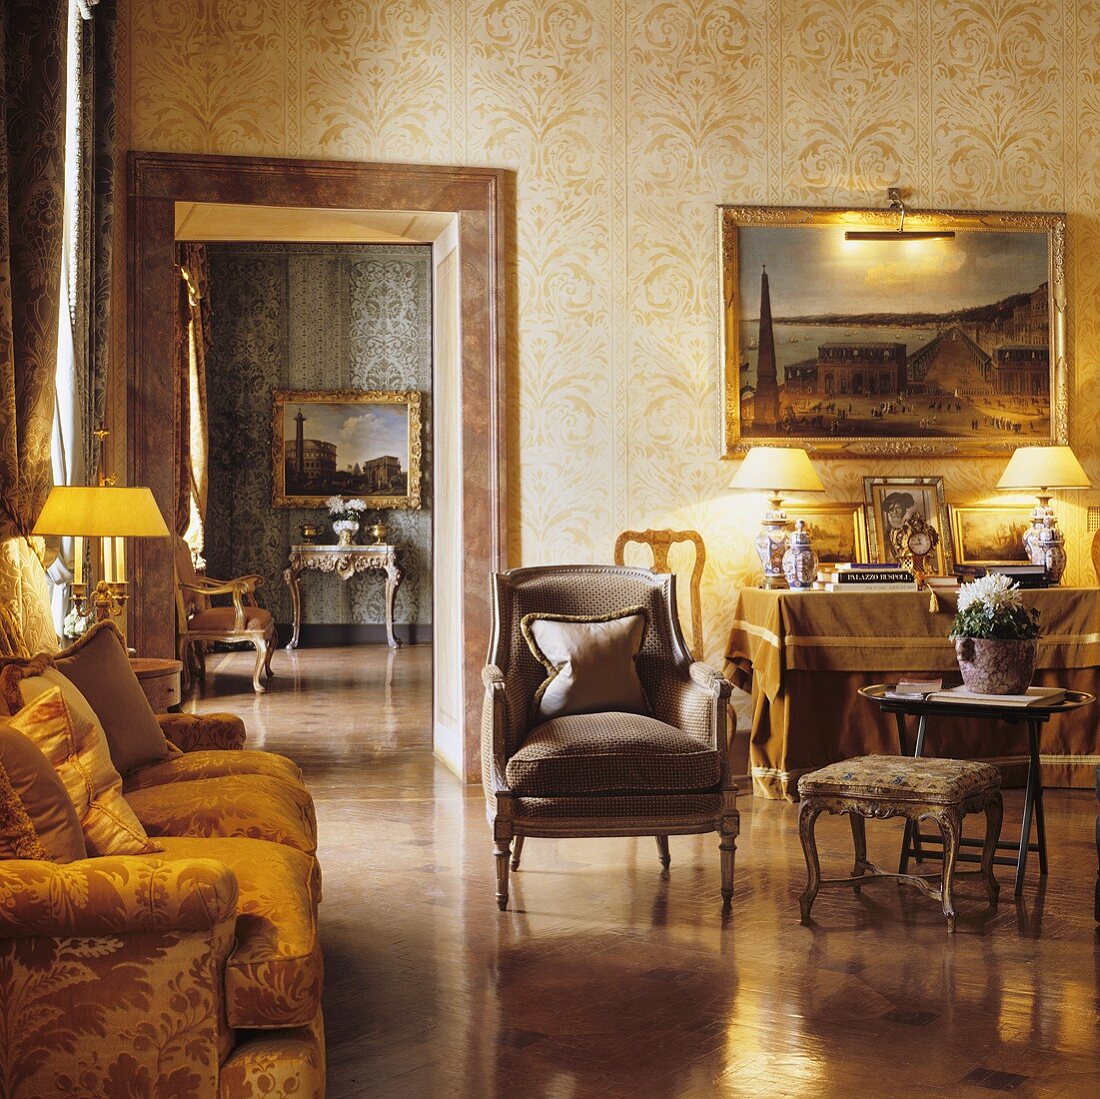 A living room in a palazzo with antique seats bathed in warm artificial light